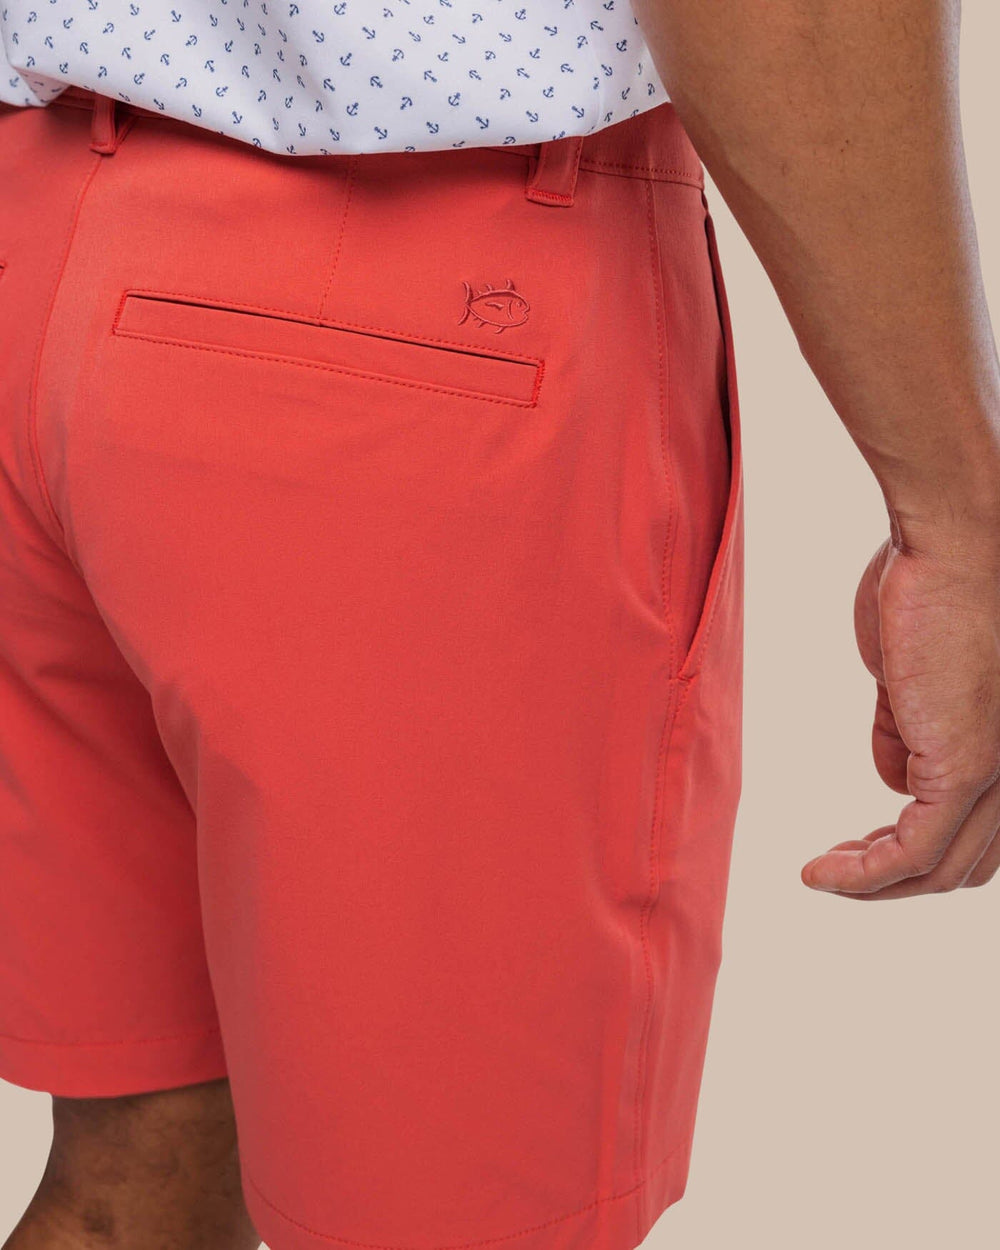 The detail view of the Southern Tide brrr°®-die 8 Inch Performance Short by Southern Tide - Mineral Red